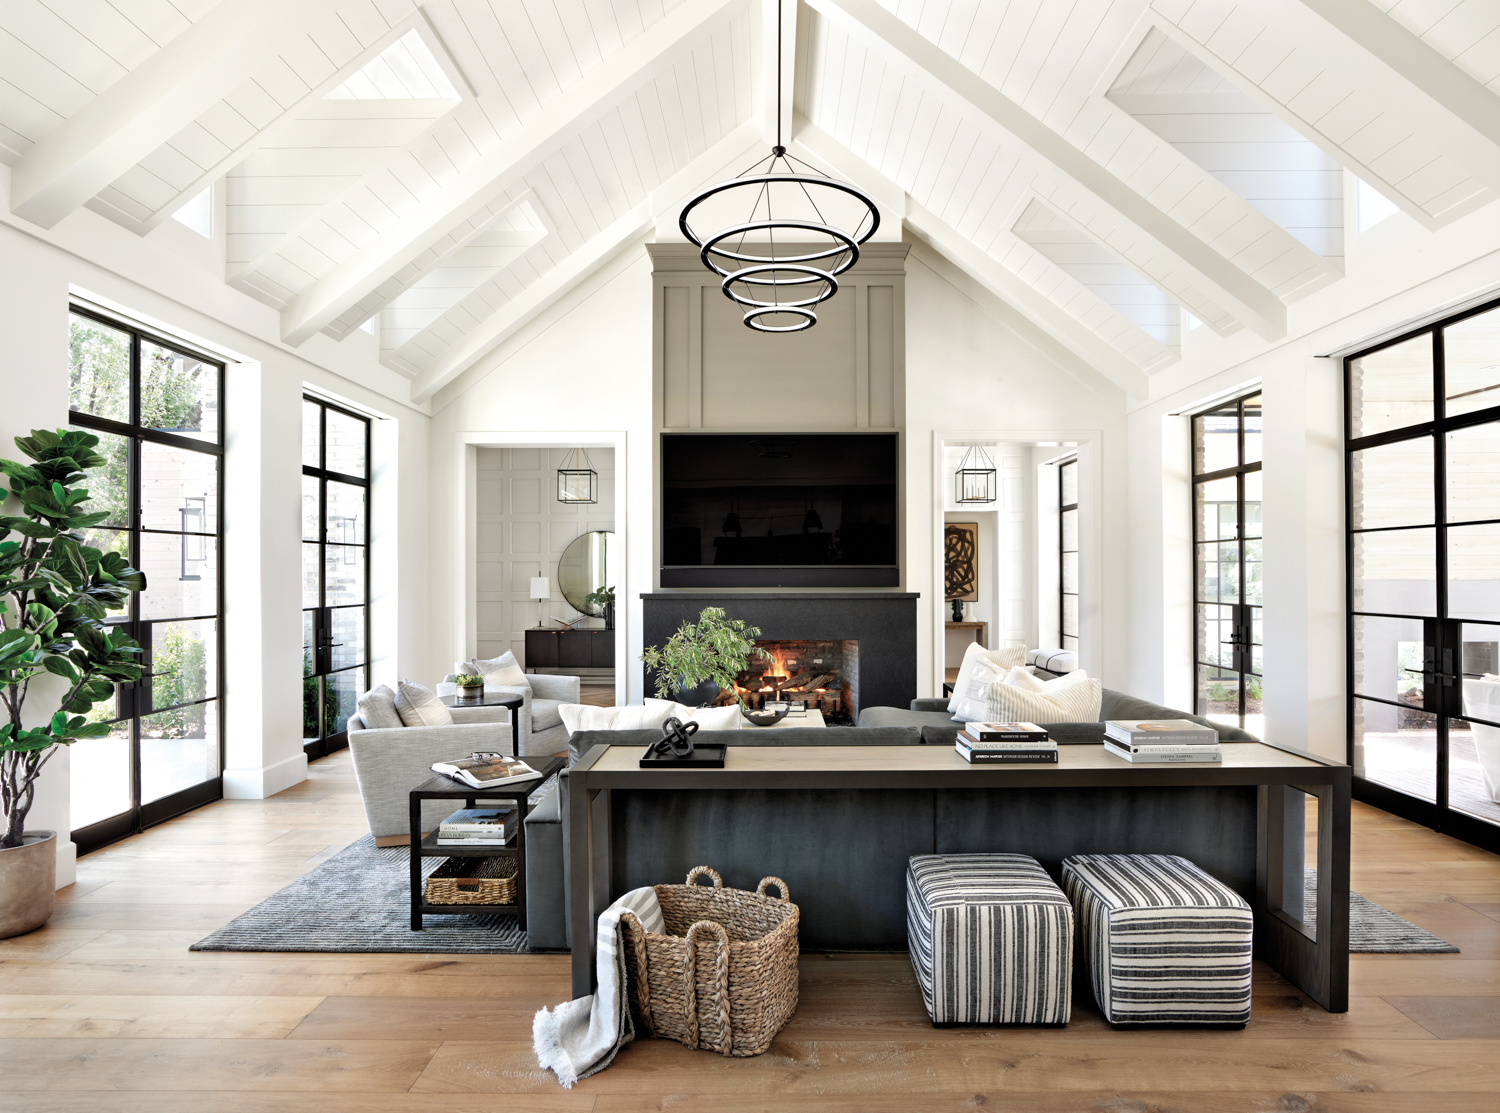 A great room in tones of white and gray with a vaulted ceilings. Steel-and-glass doors line either side of the room.